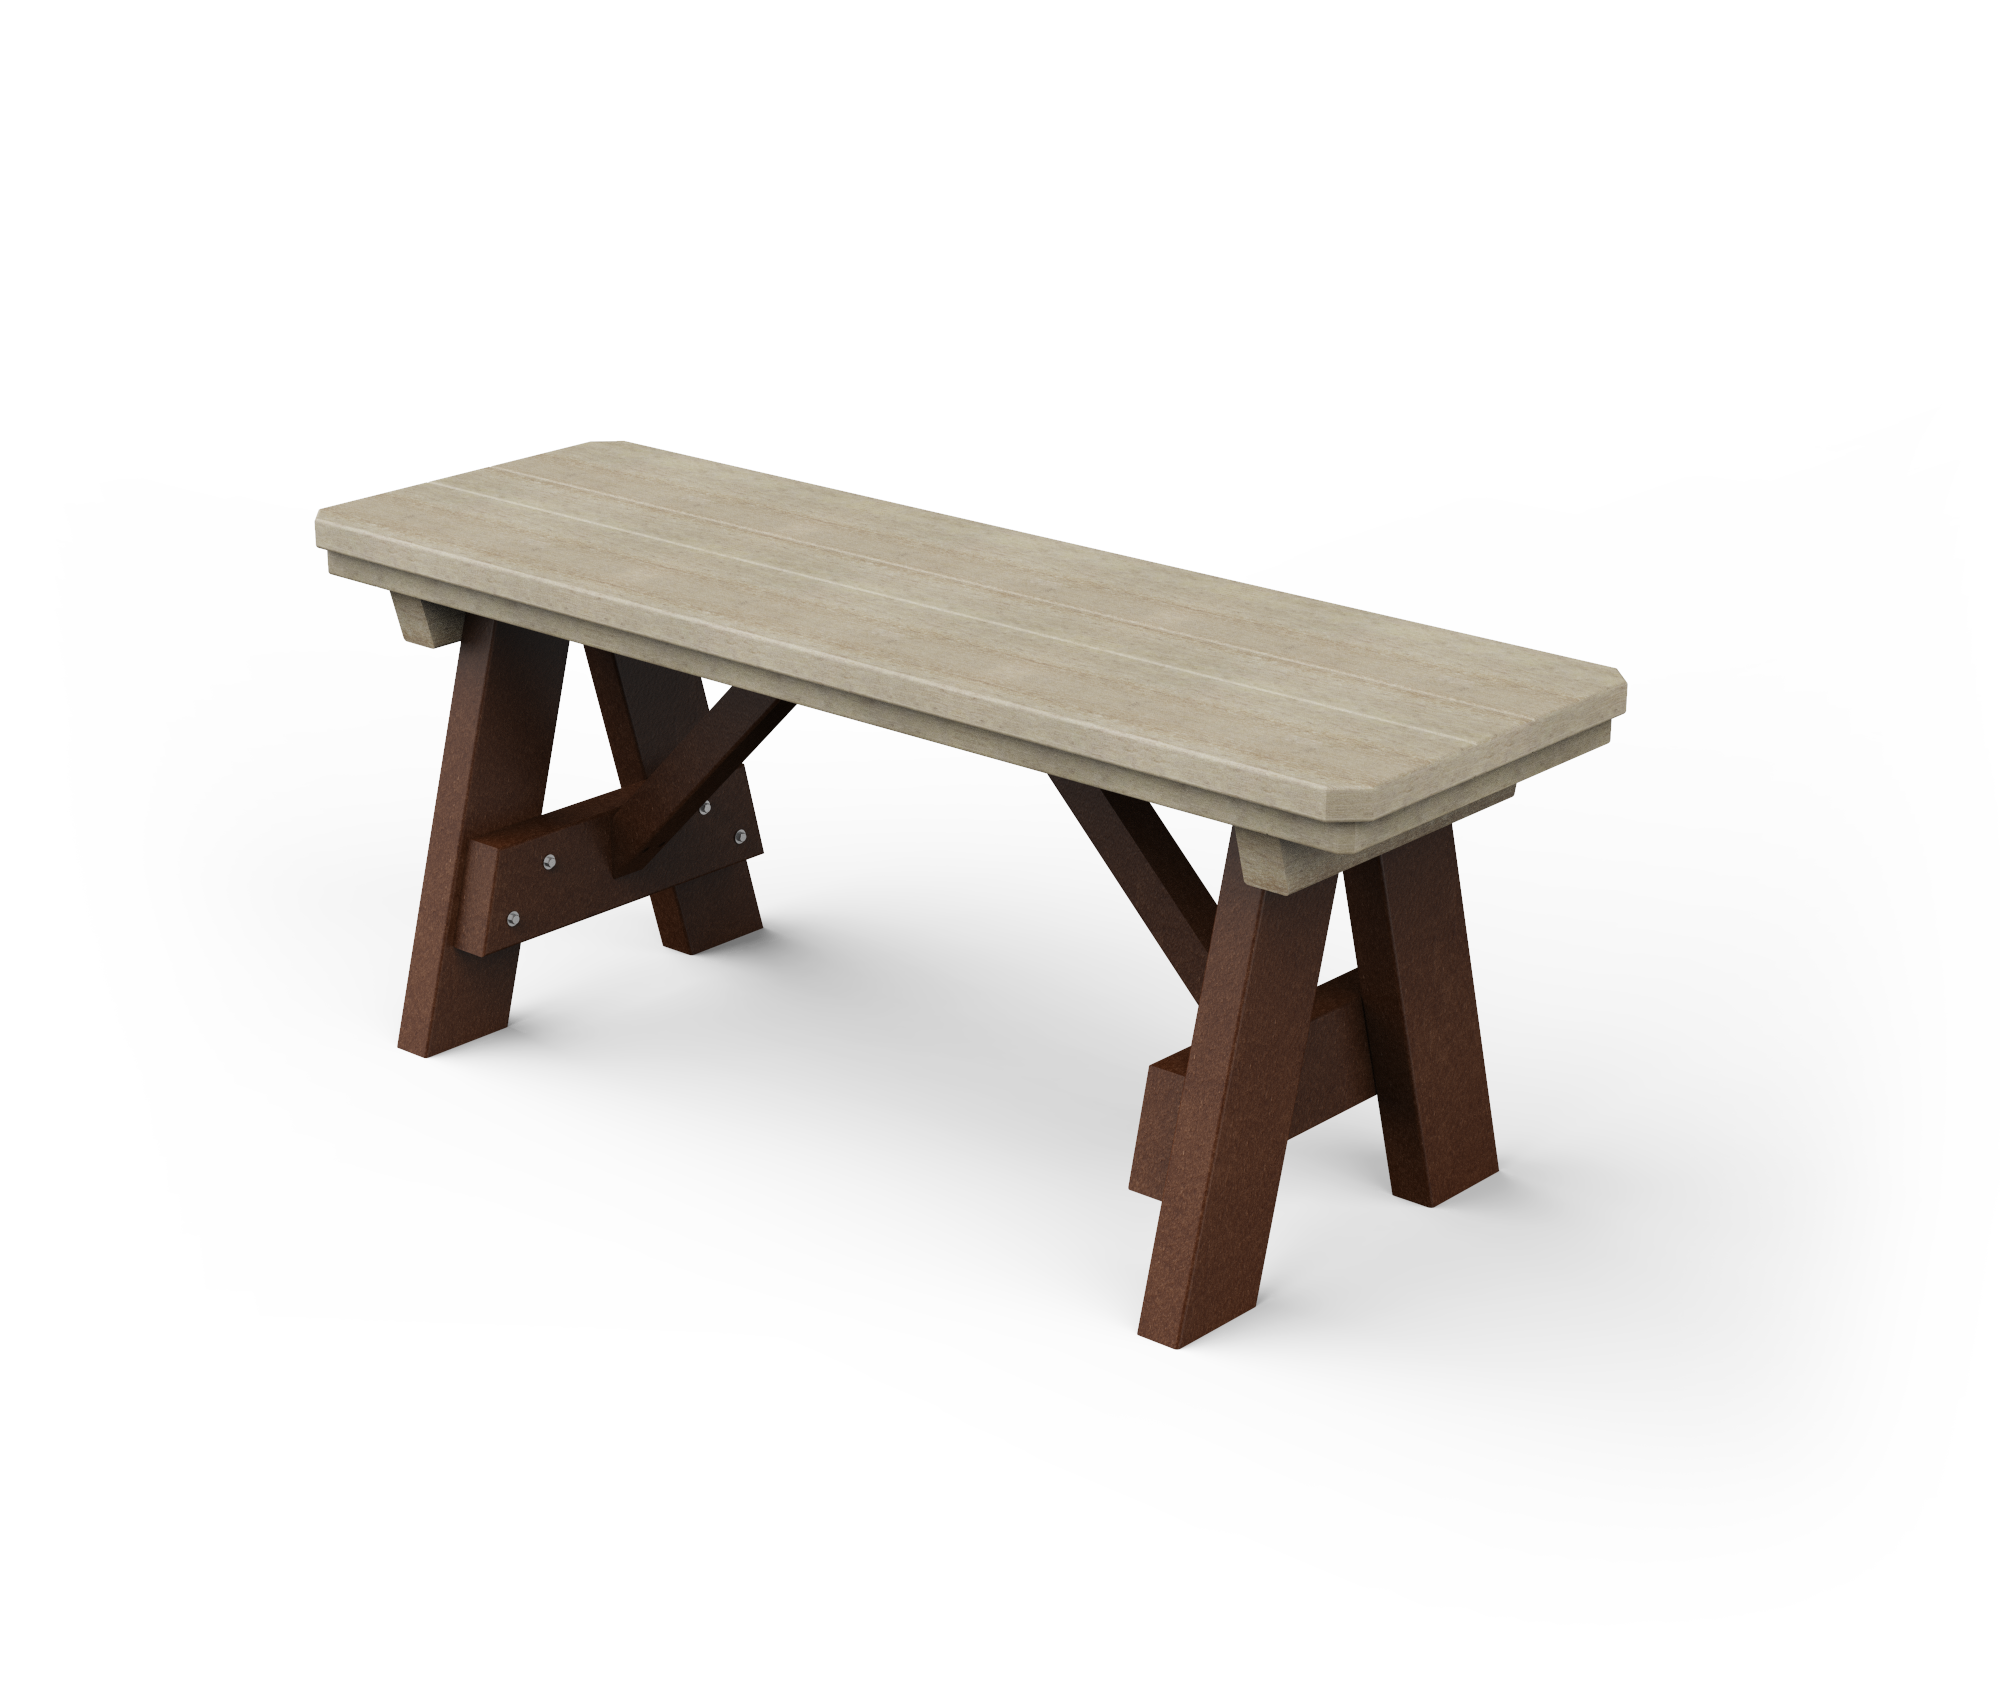 Poly dining picnic bench.